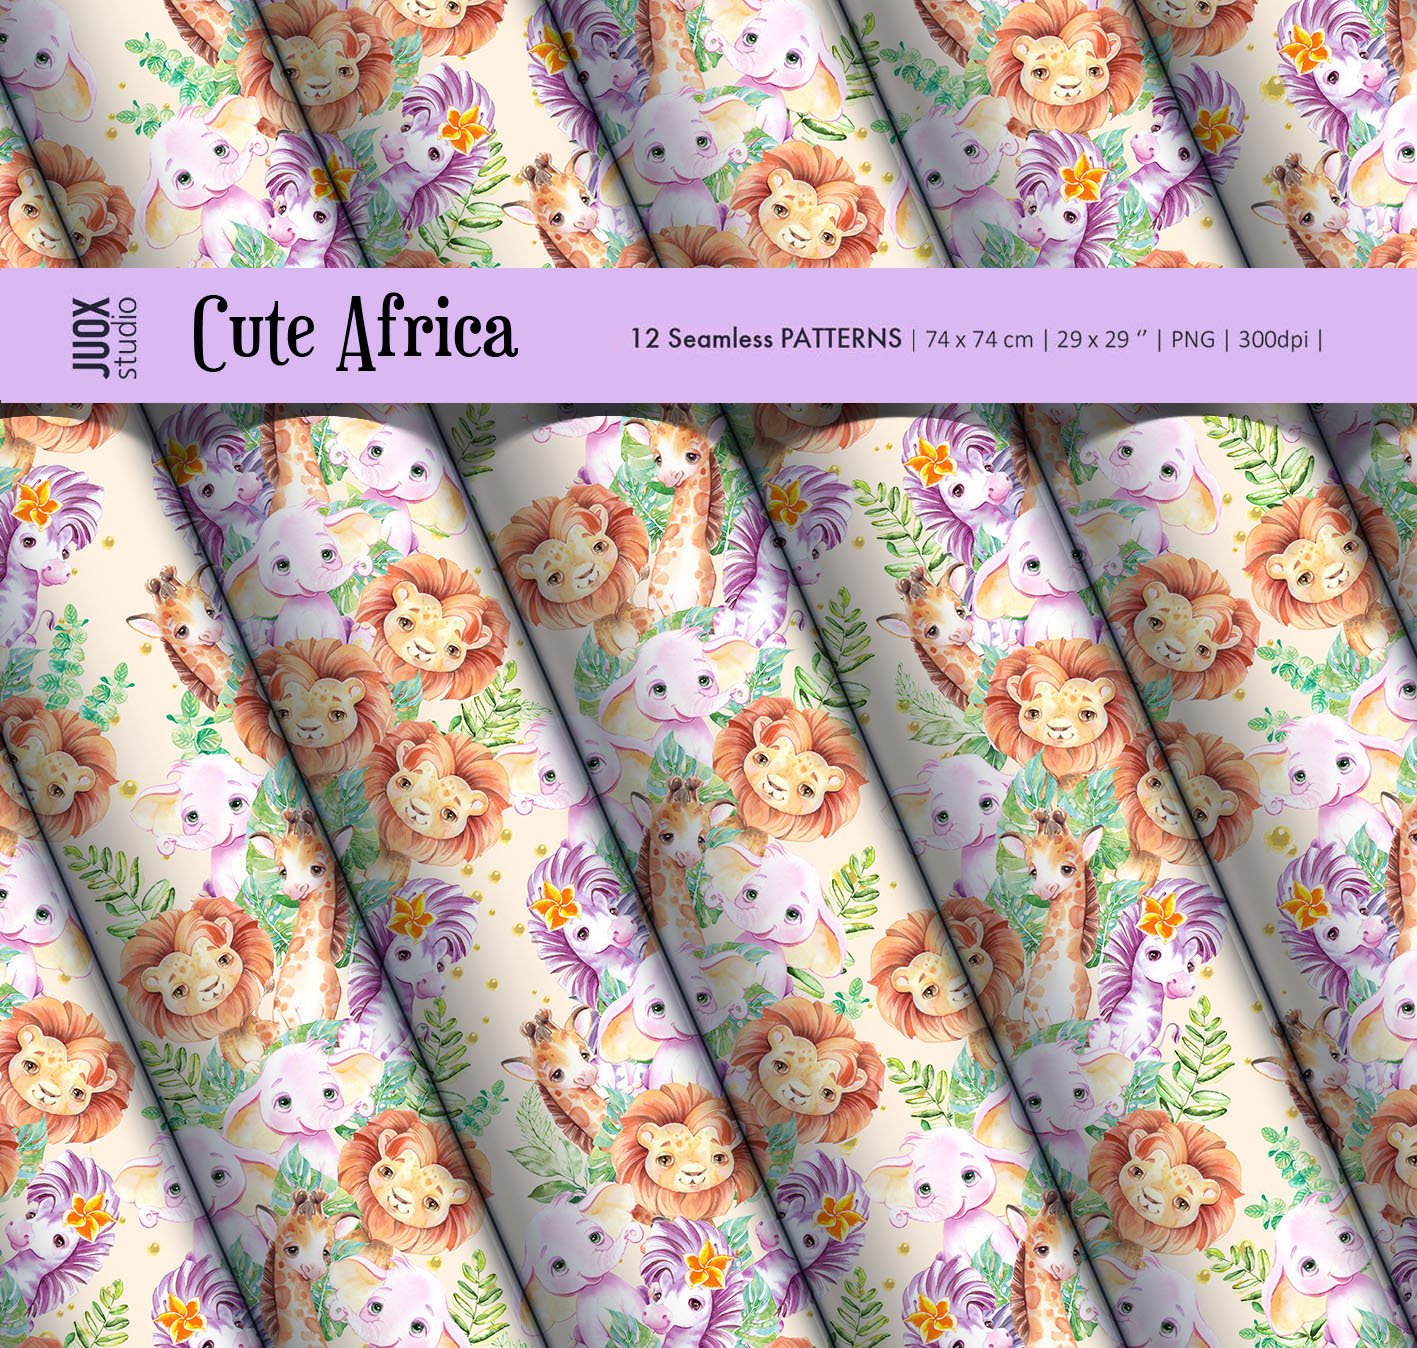 Cute Africa Patterns & Elements.